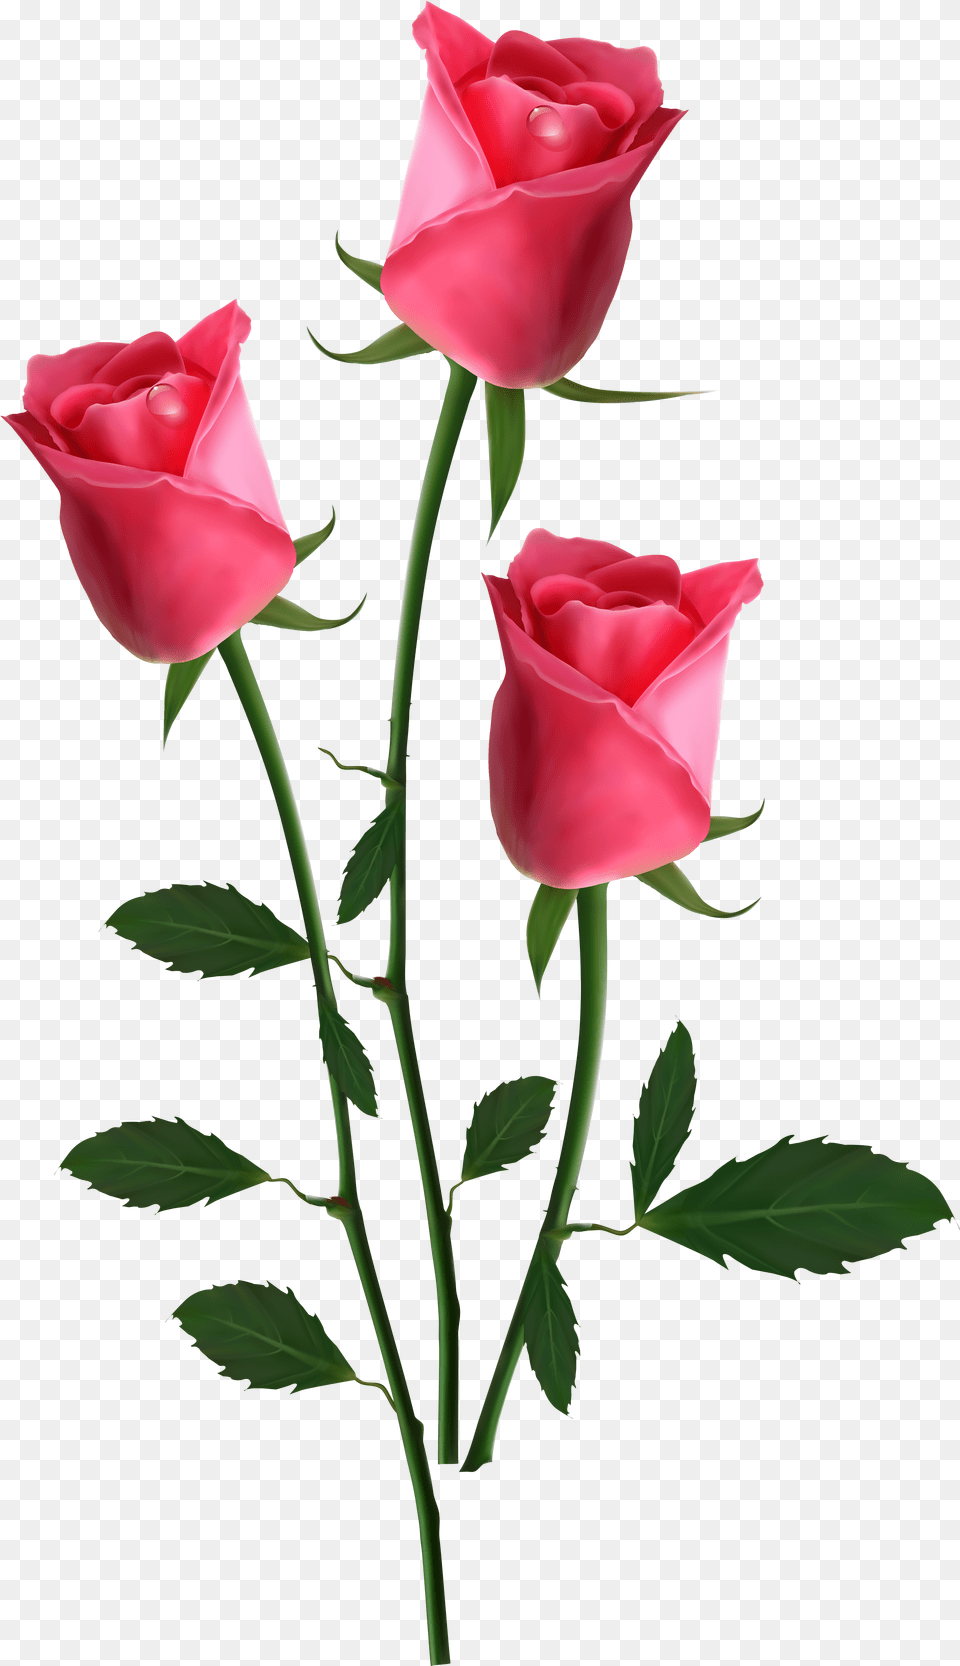 Garden Roses Flower Clip Art New Happy Valentines Day, Plant, Rose Png Image